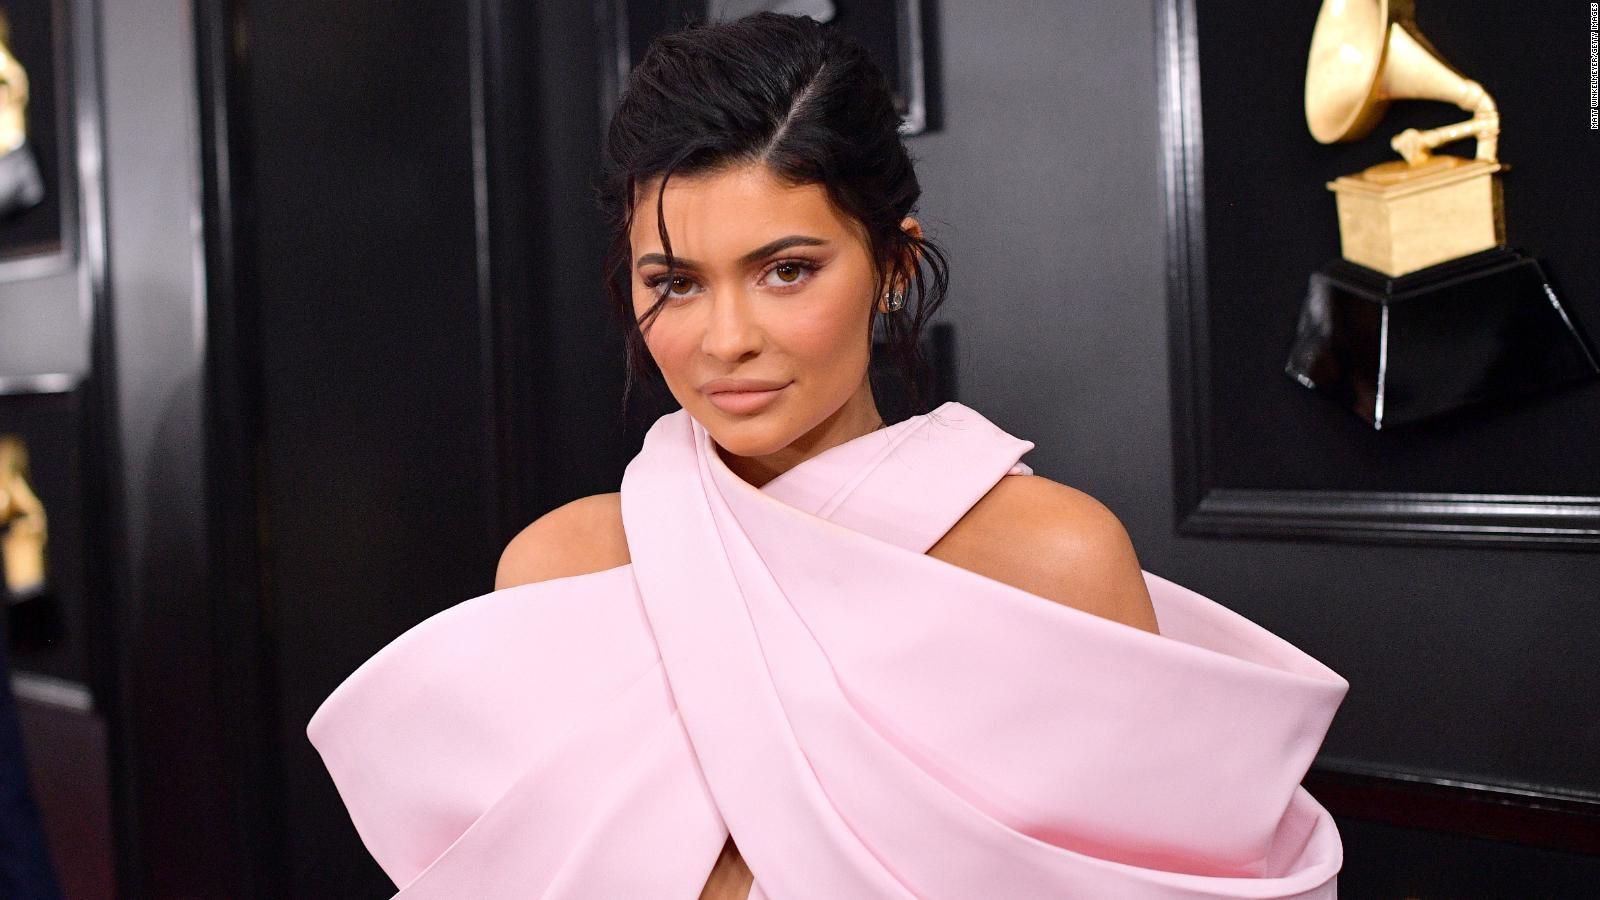 Kylie Jenner: What Does It Mean To Be A 'self Made' Billionaire?